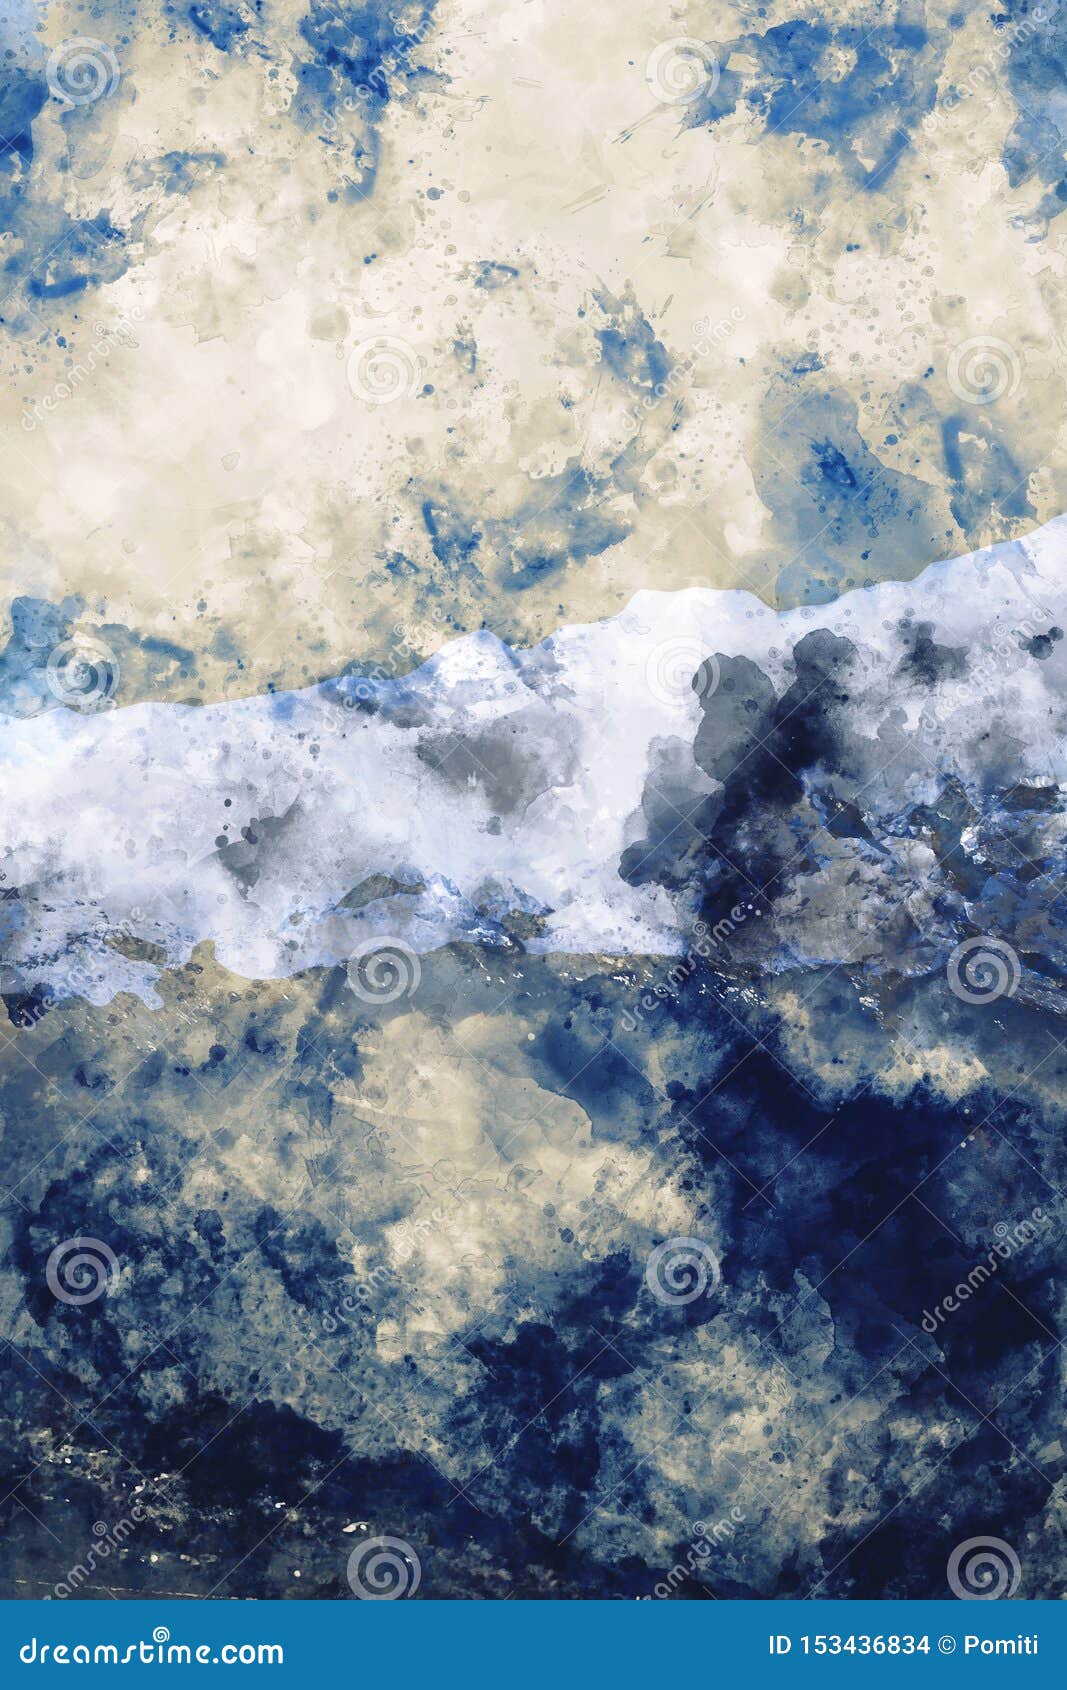 Digital Abstract Painting In Cool Tone For Background Stock Illustration - Illustration Of Grungy, Brown: 153436834